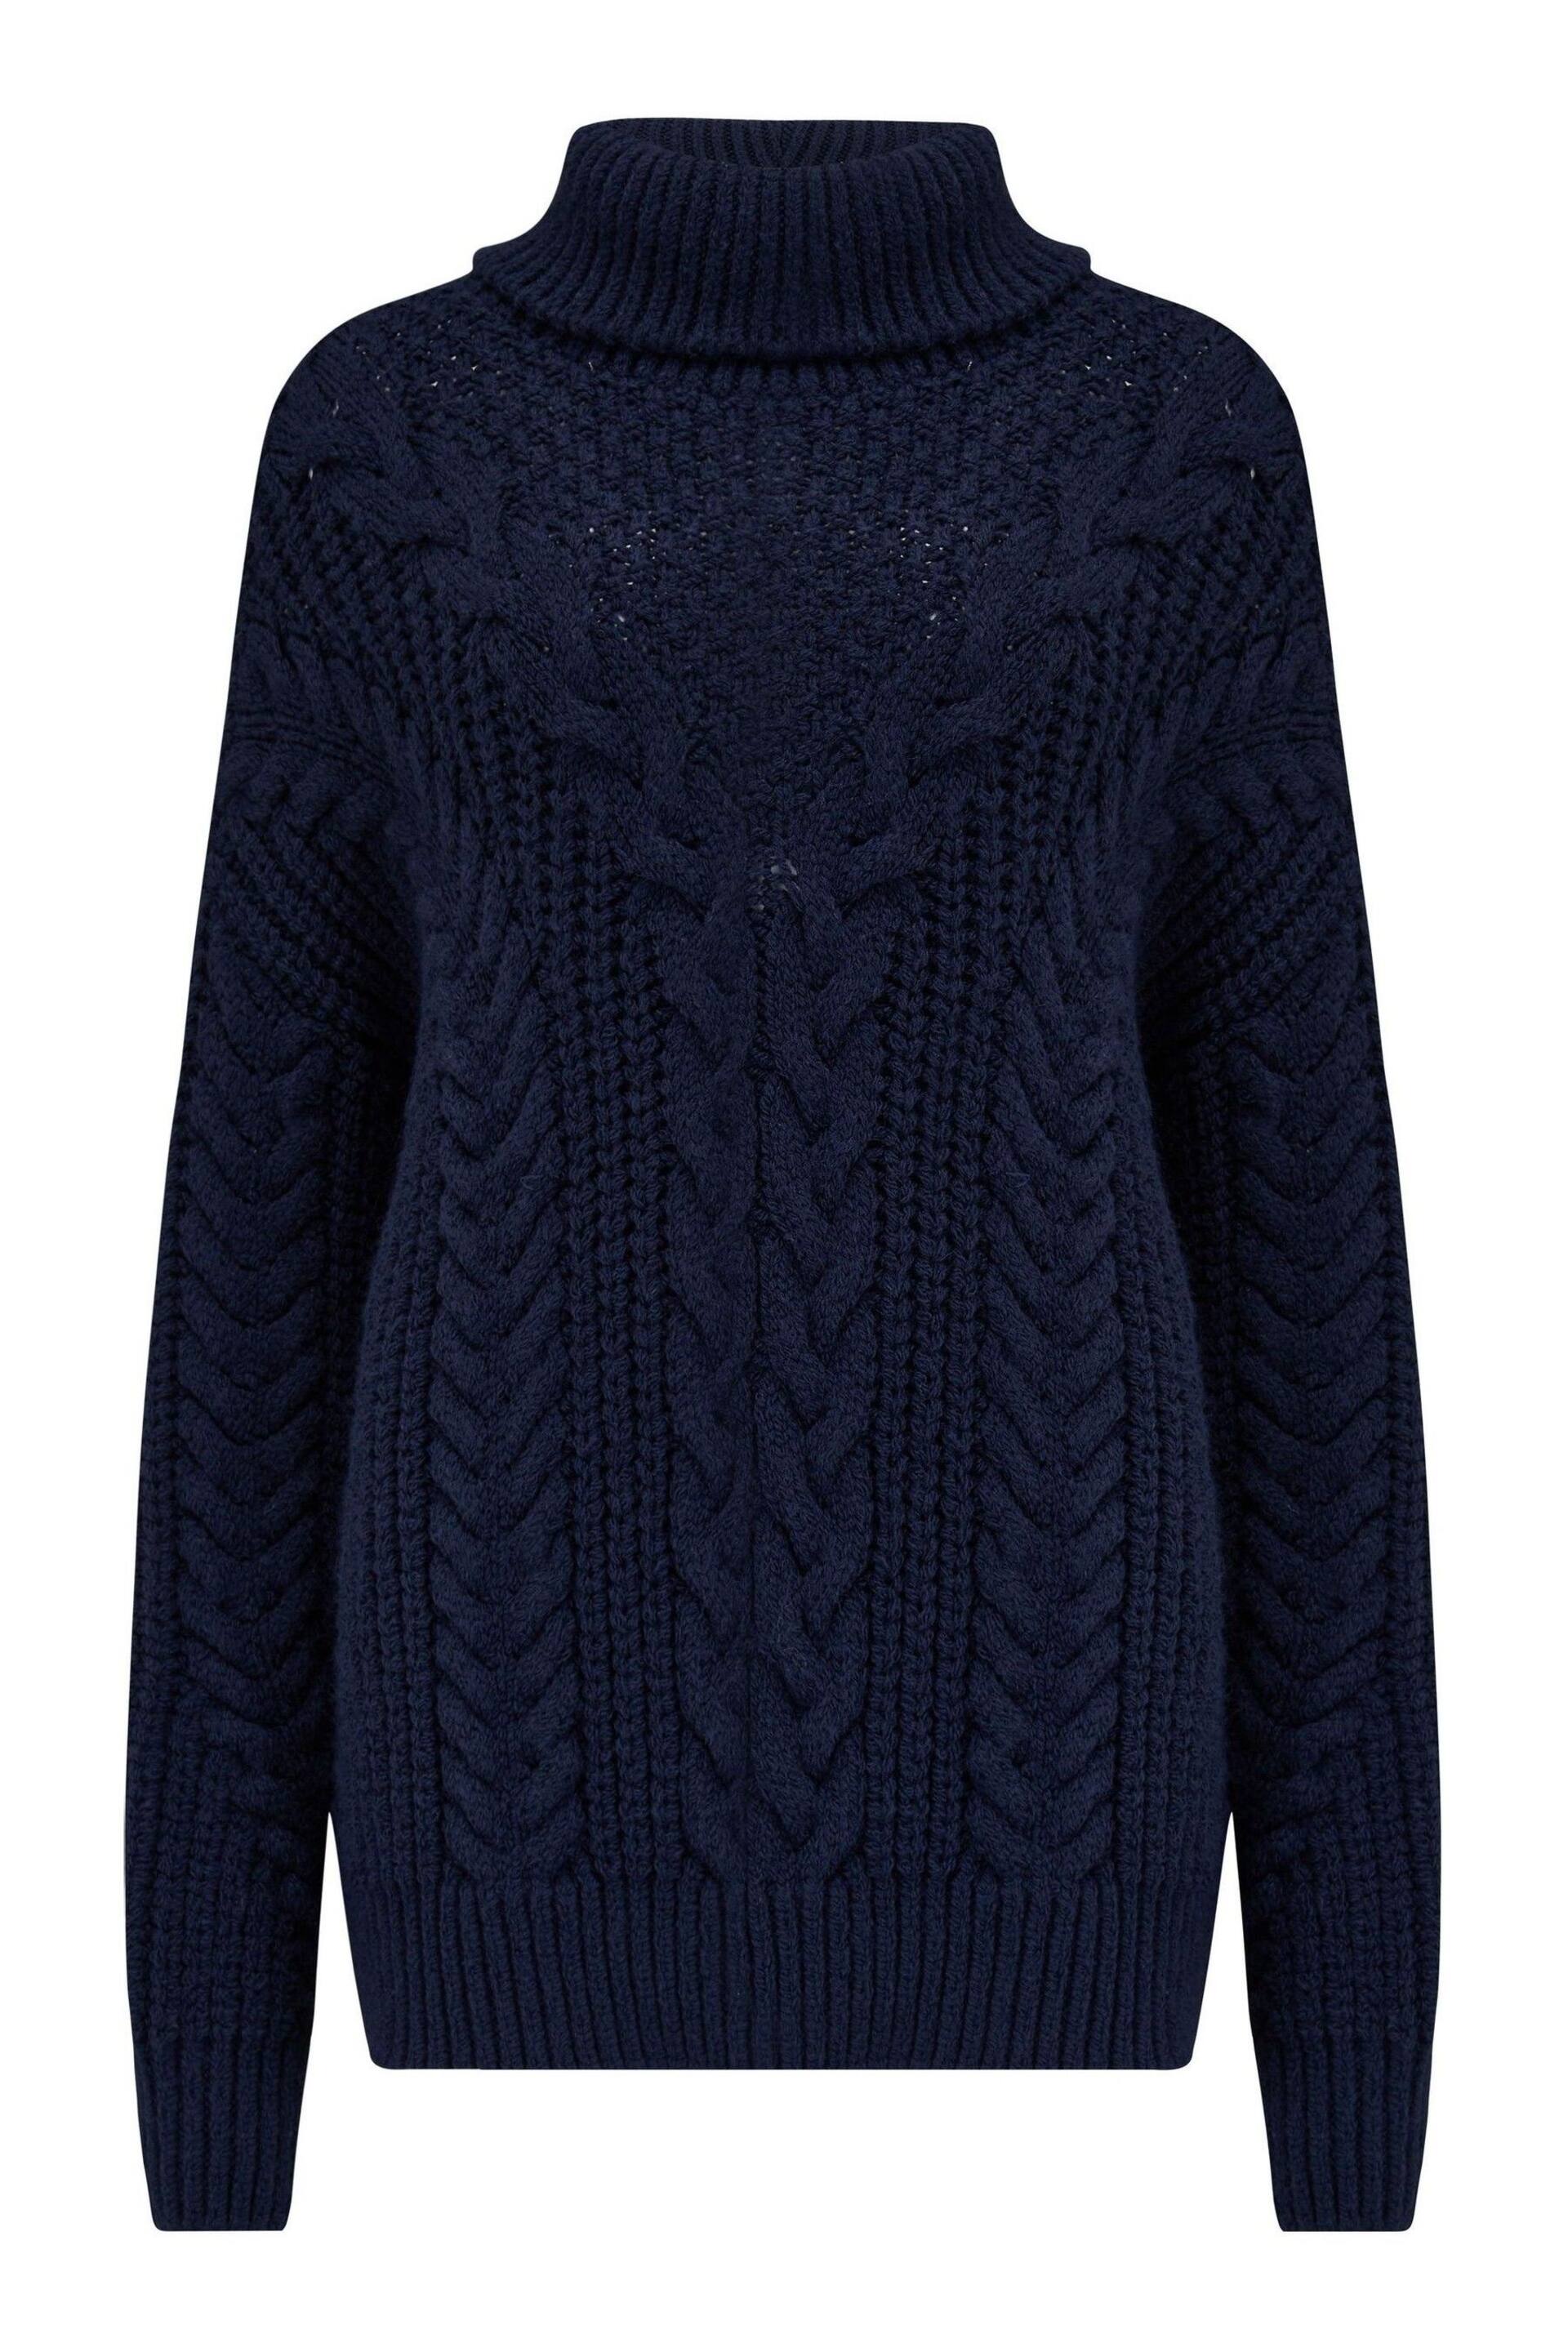 Pour Moi Blue Alice Chunky Cable Knit Rollneck Knit Jumper - Image 3 of 4